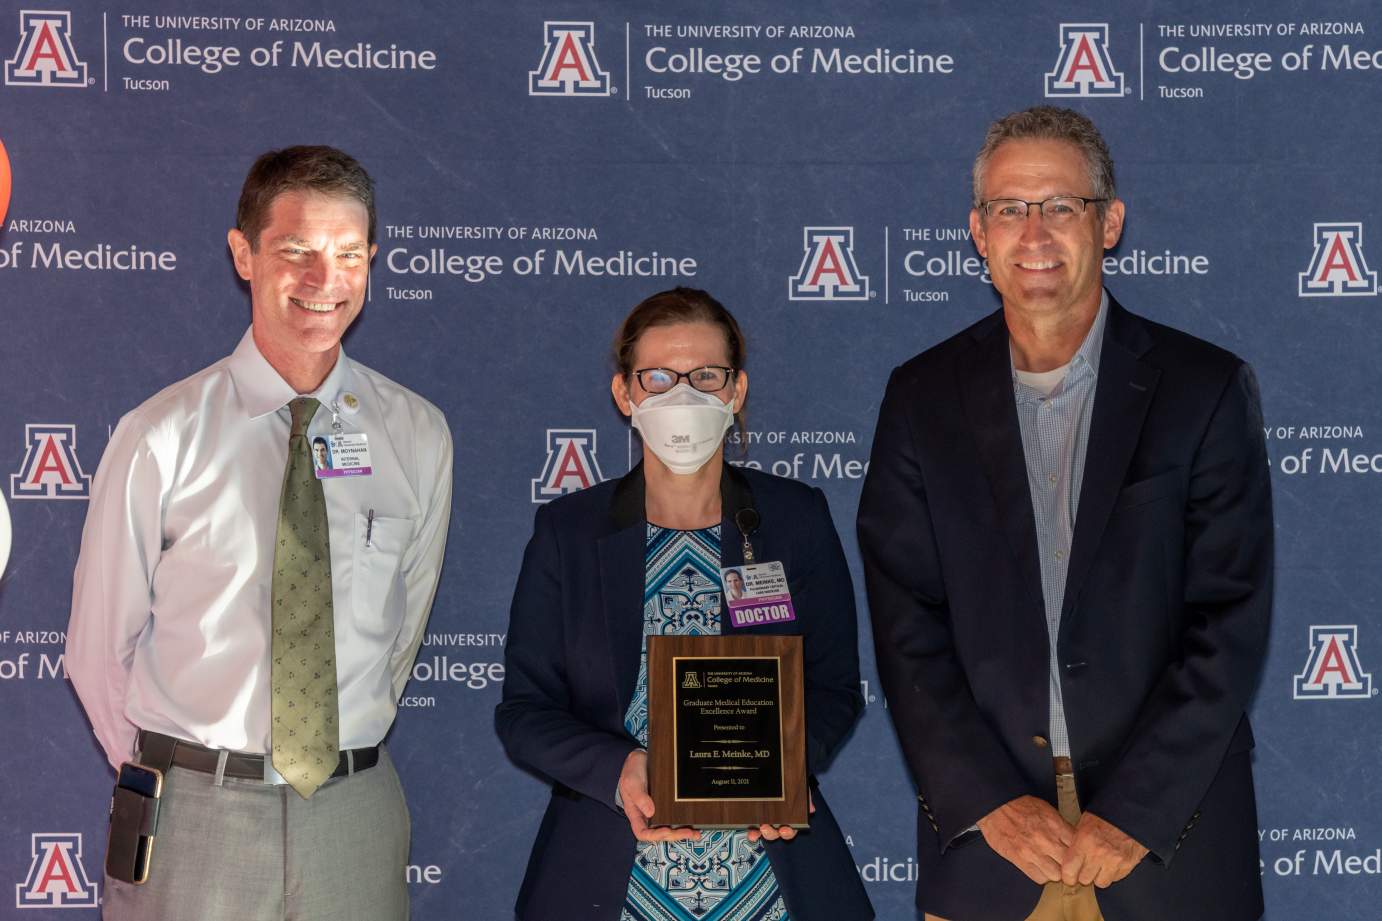 [Dr. Laura Meinke is presented with the Award for Excellence in Graduate Medical Education by Dr. Kevin Moynahan and Dr. Conrad Clemens.]